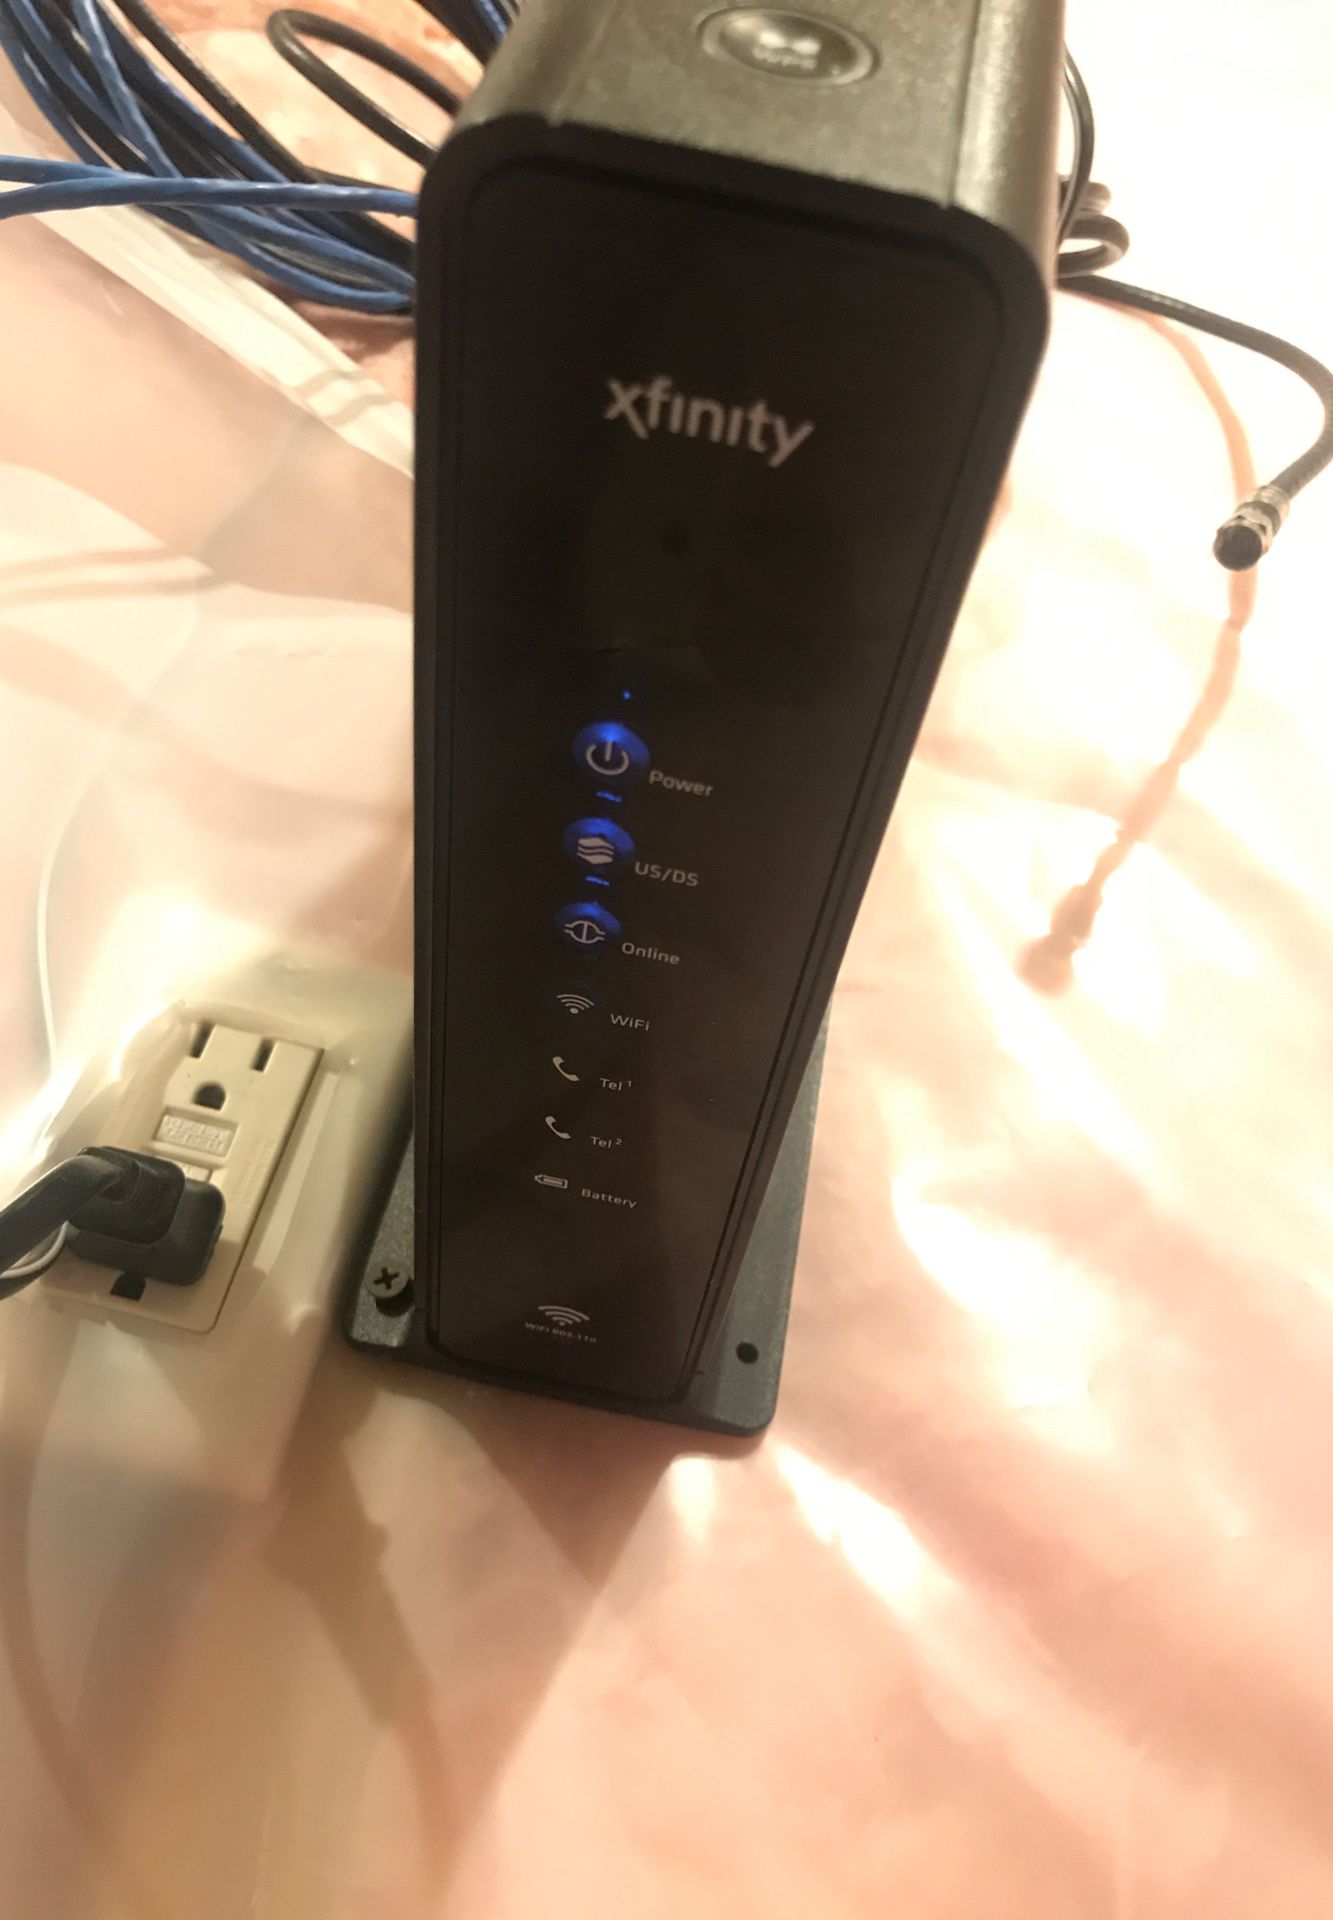 Xfinity modem/router and phone service